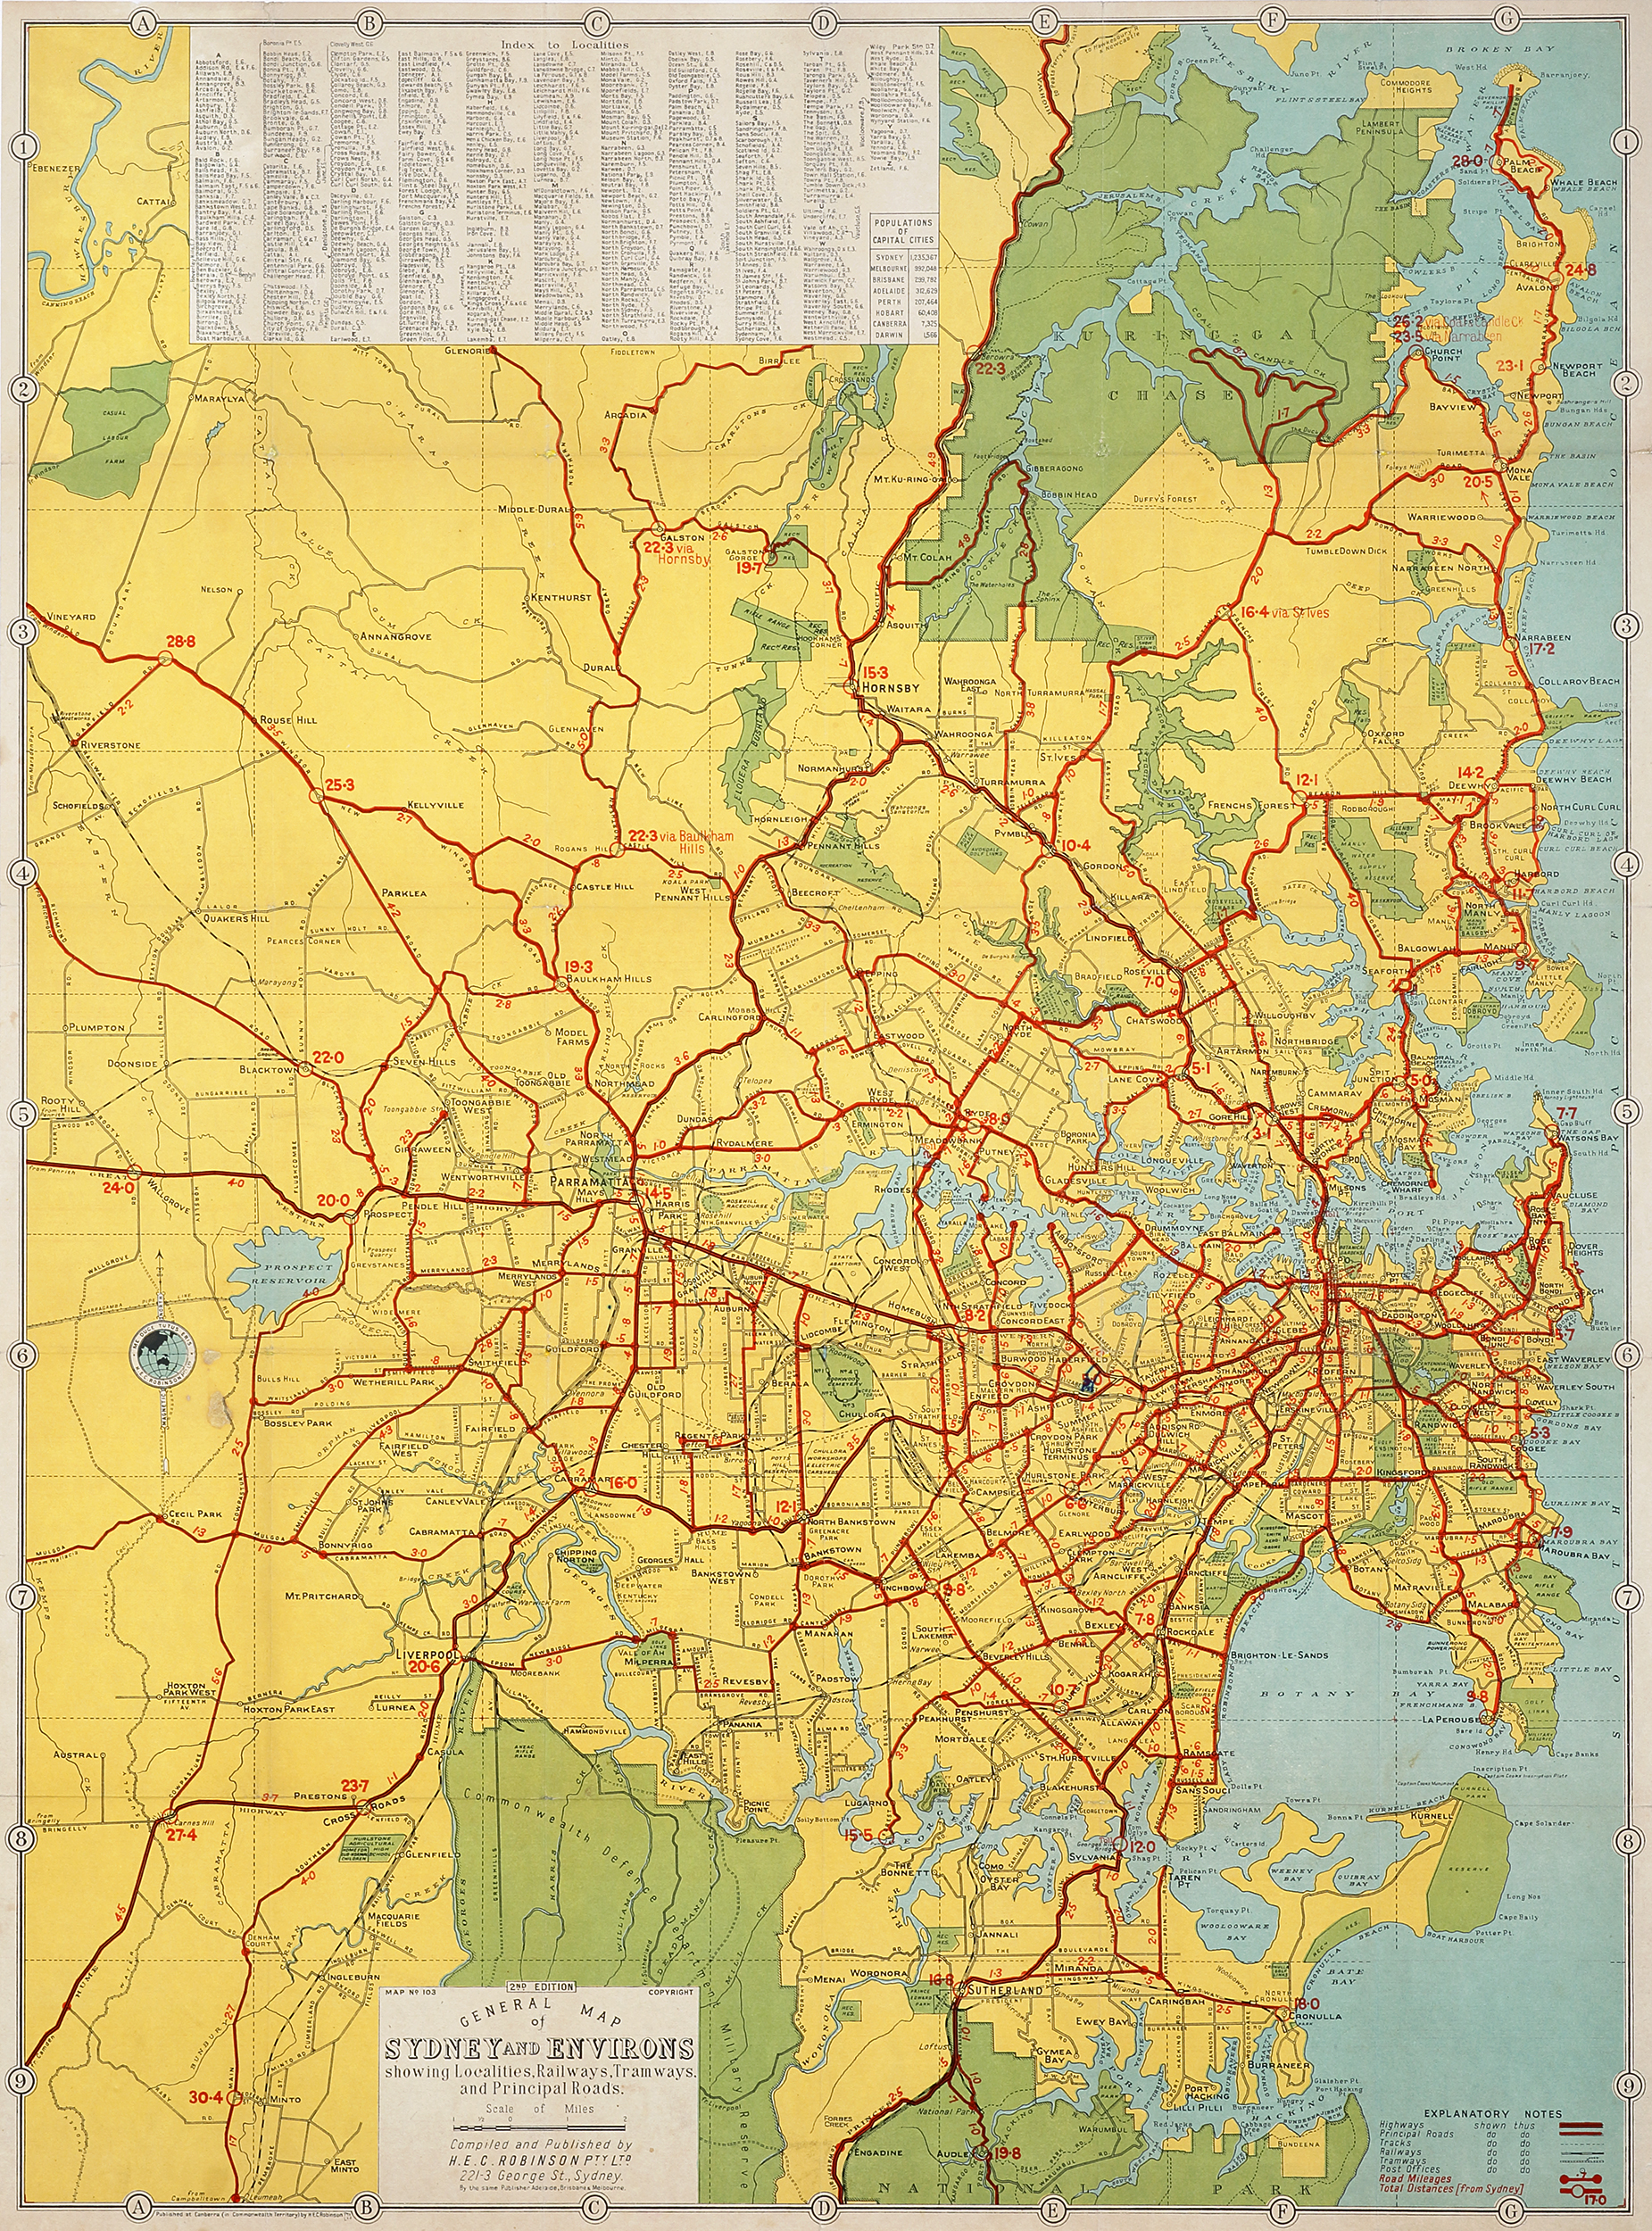 General Map of Sydney and Environs showing Localities, Railways, Tramways, and Principal Roads. - Vintage Map from 1958